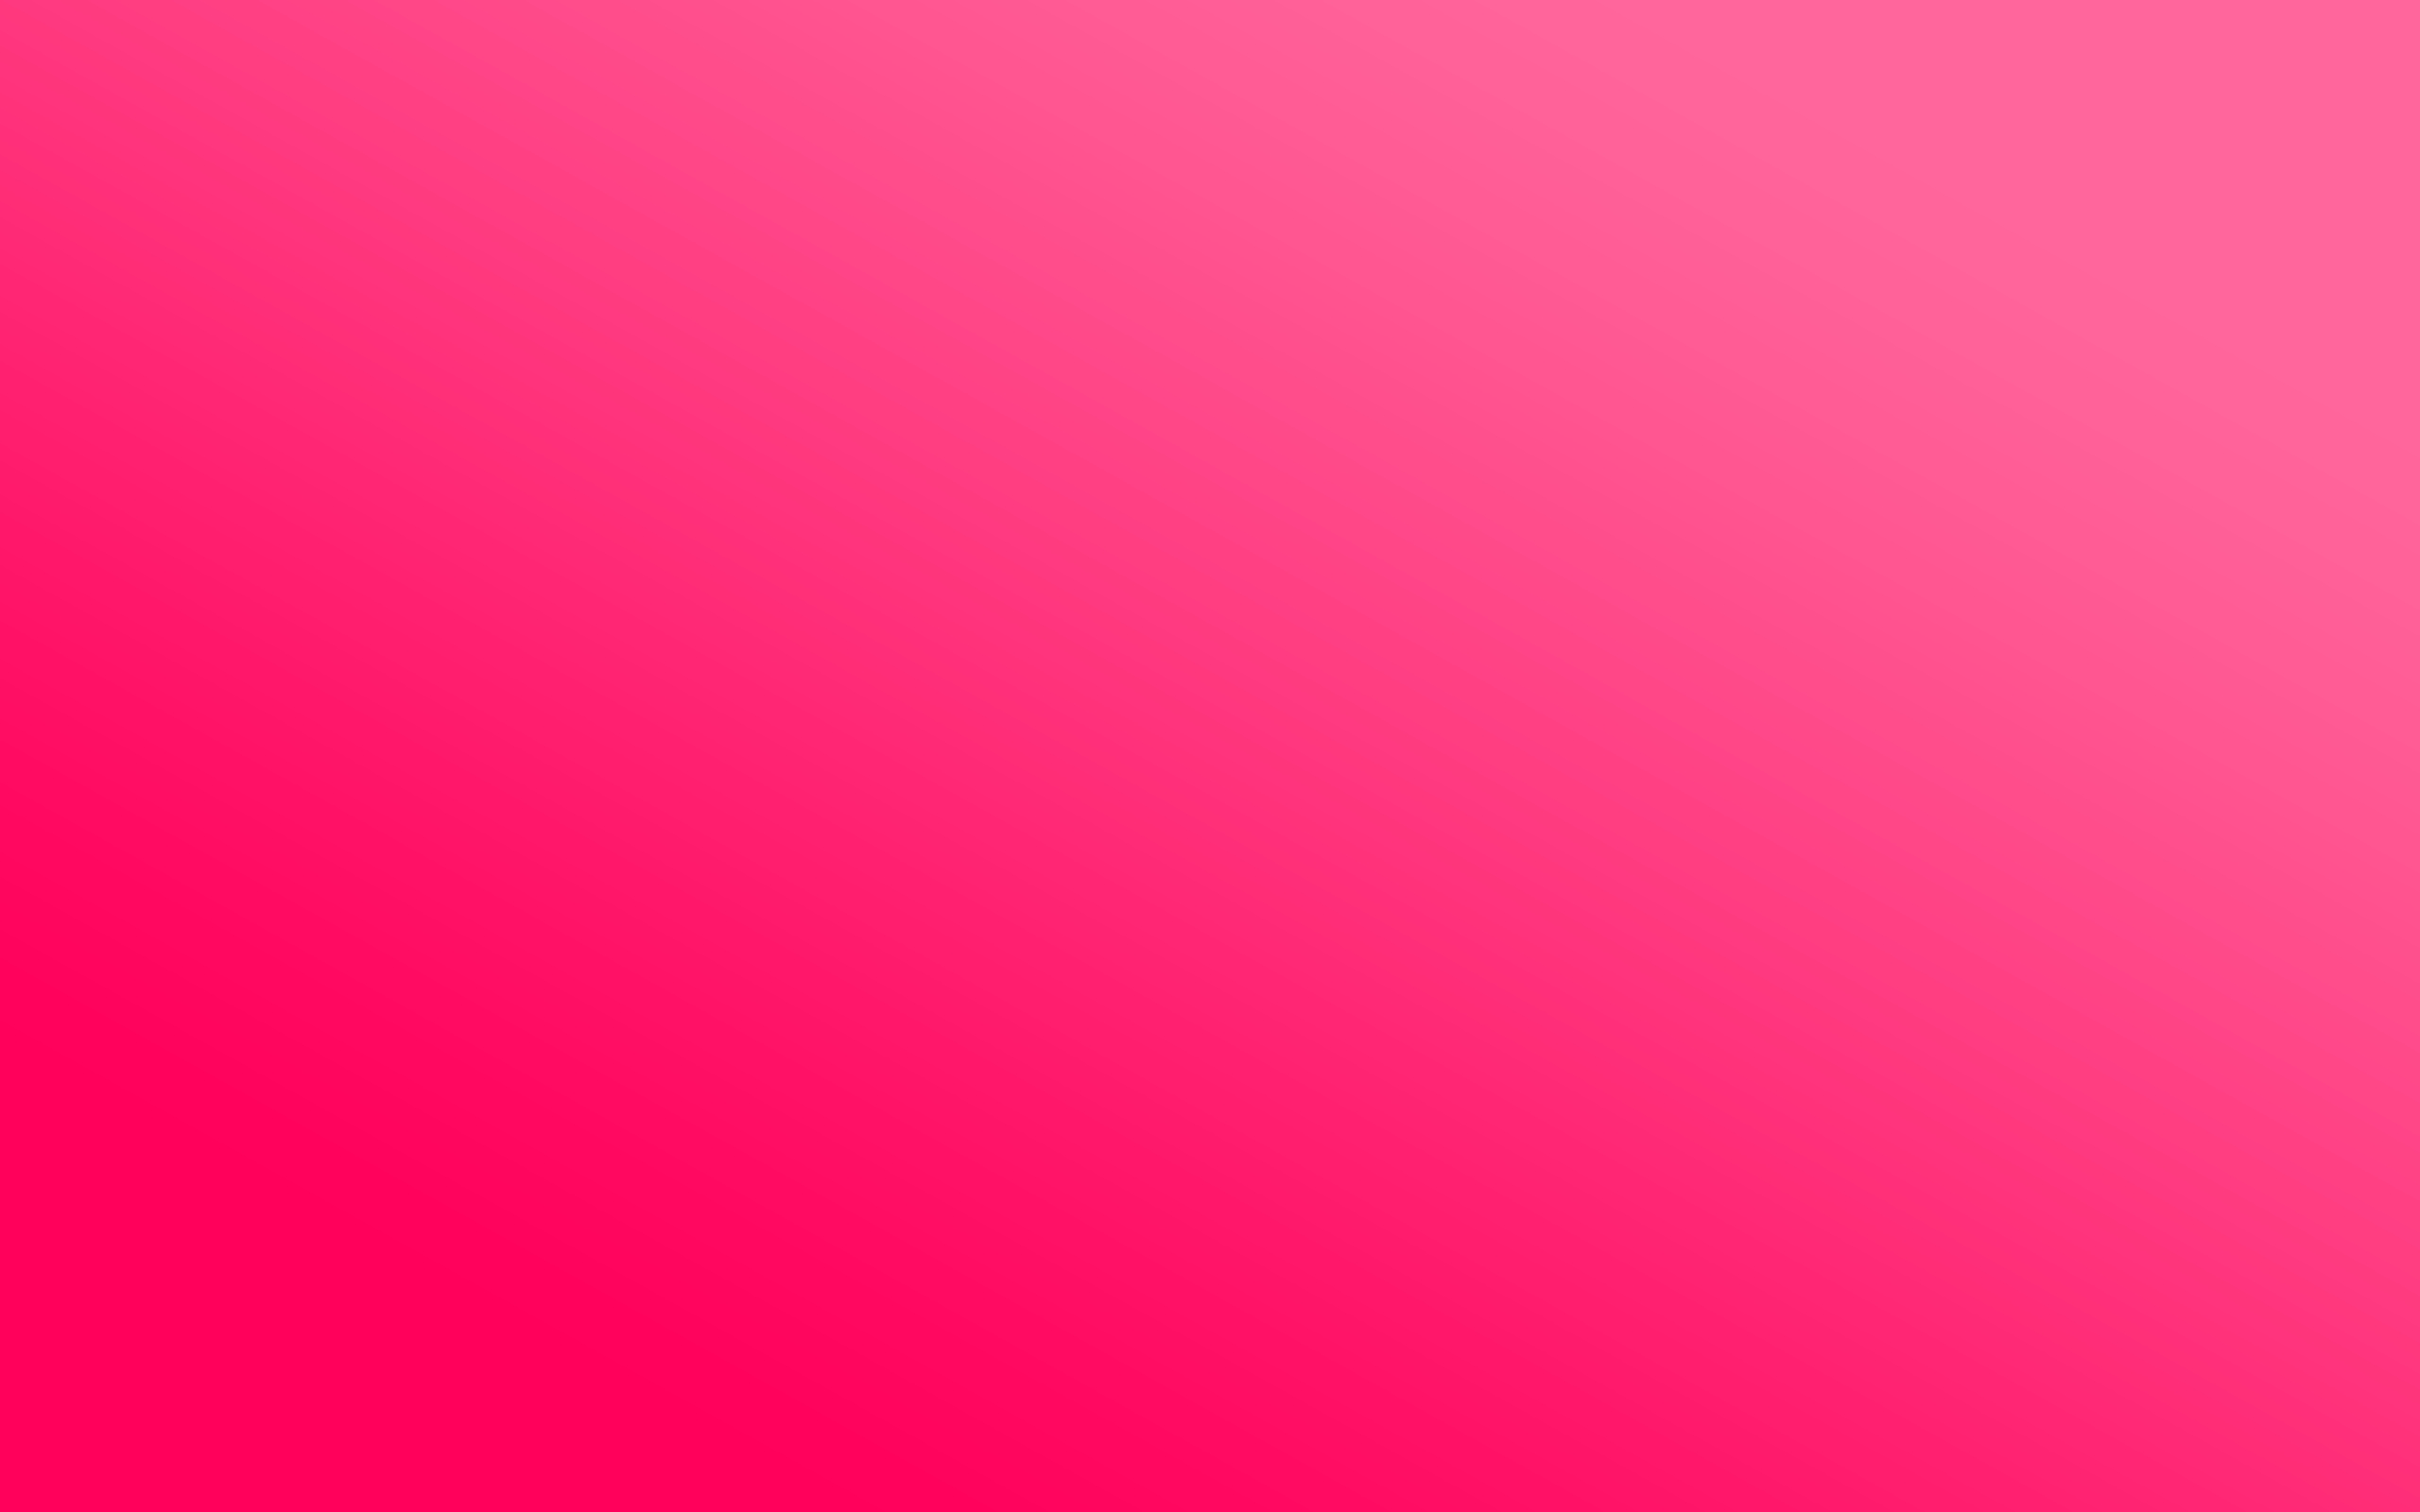 File Name 870499 Pink Solid Color HD Wallpapers Backgrounds